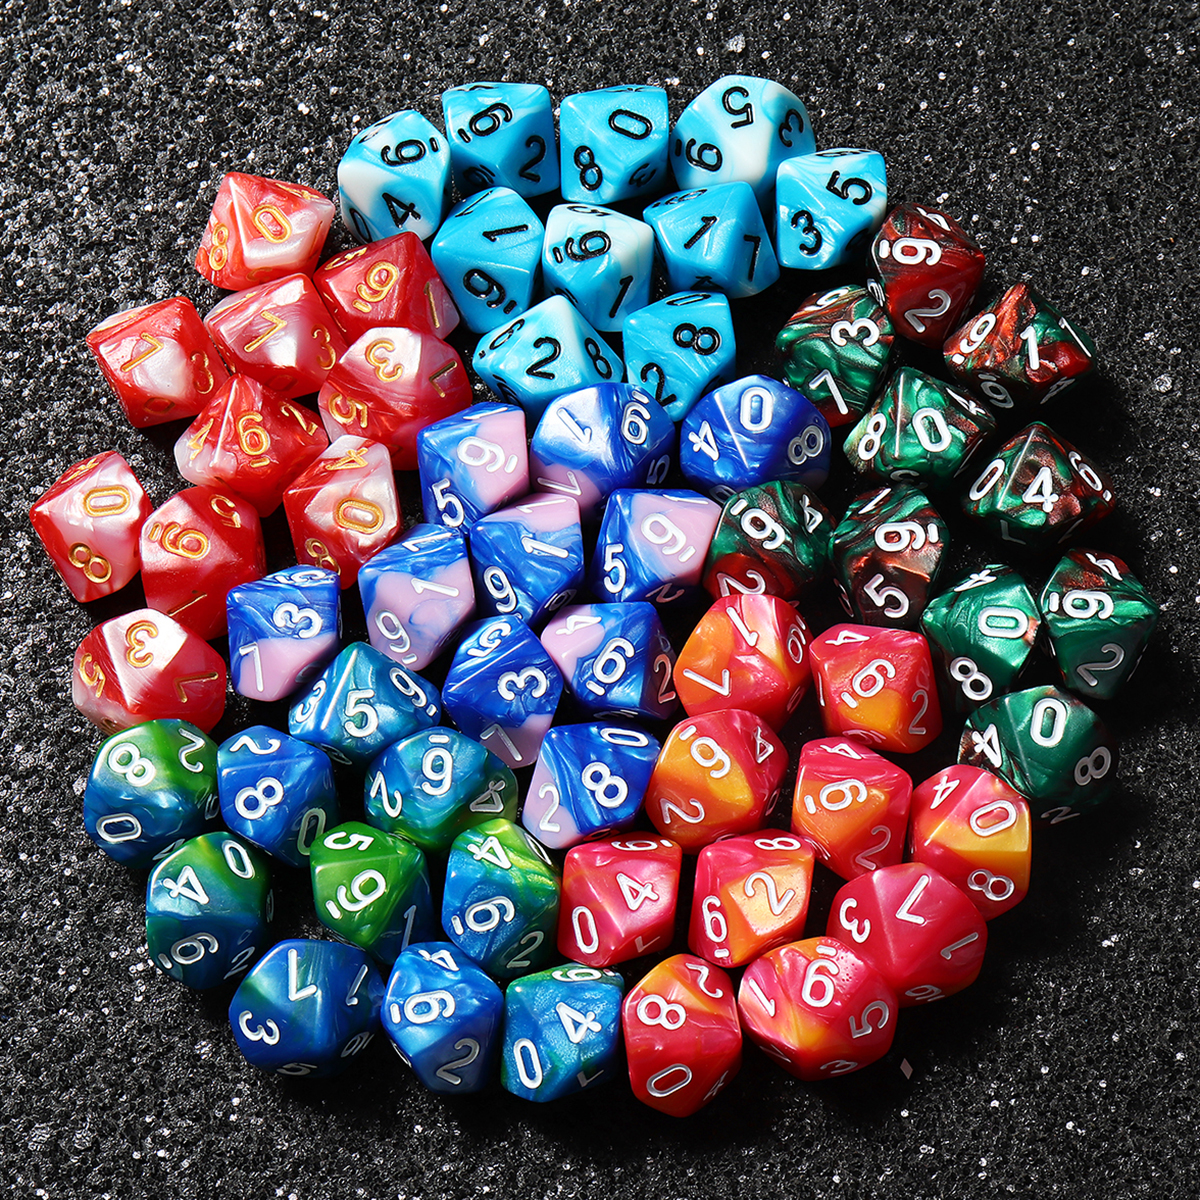 10pcs-10-Sided-Dice-D10-Polyhedral-Dice-RPG-Role-Playing-Game-Dices-w-bag-1351752-1